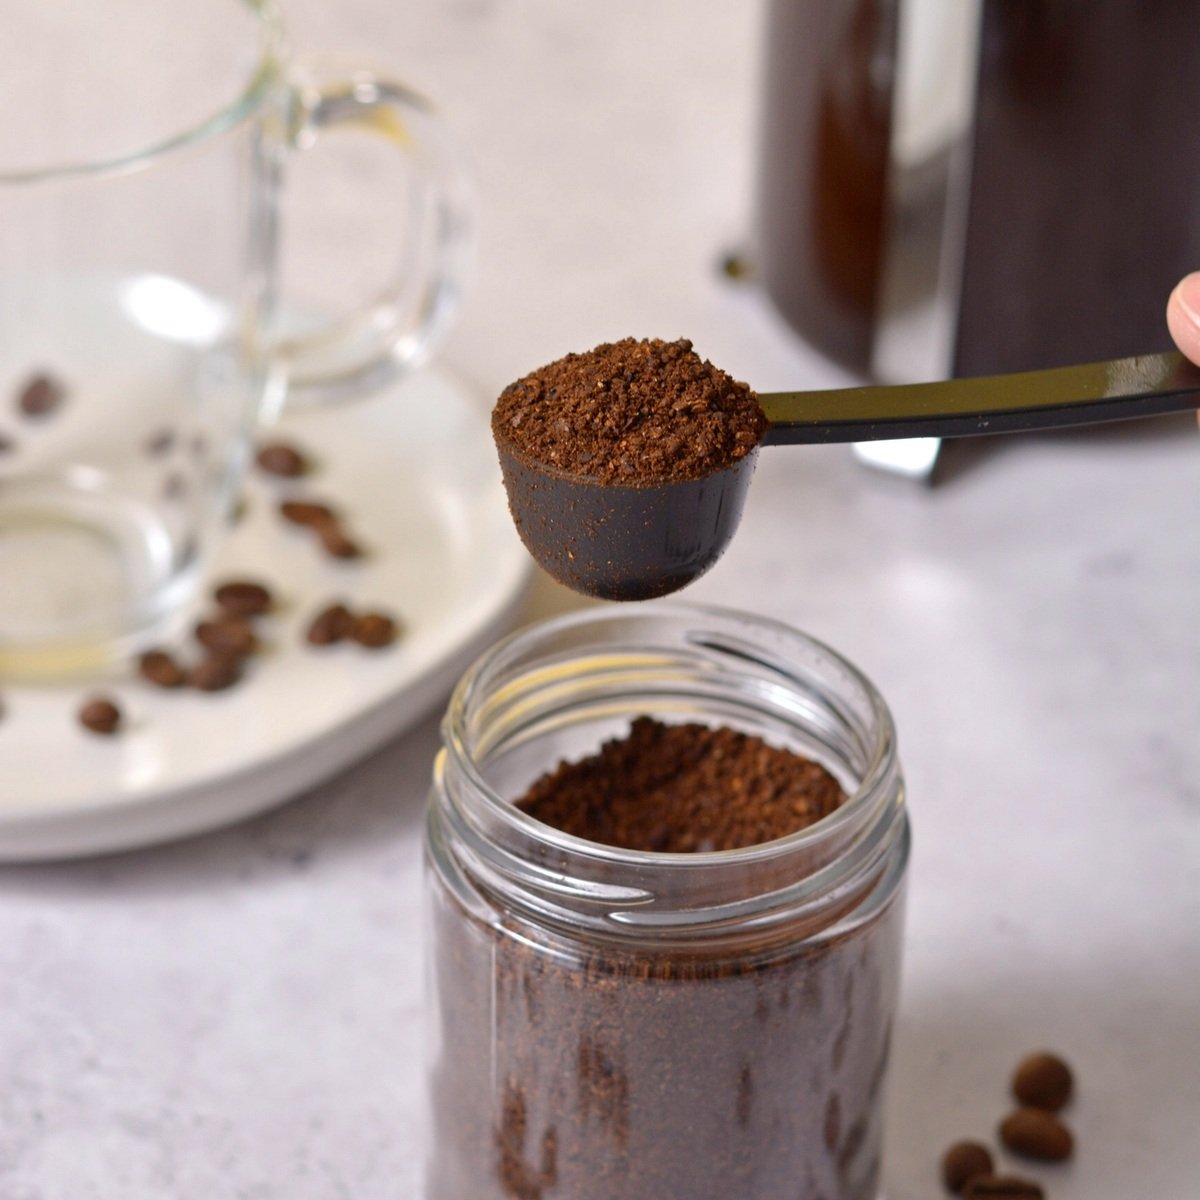 Taking a scoop of coffee grounds out of a glass jar.